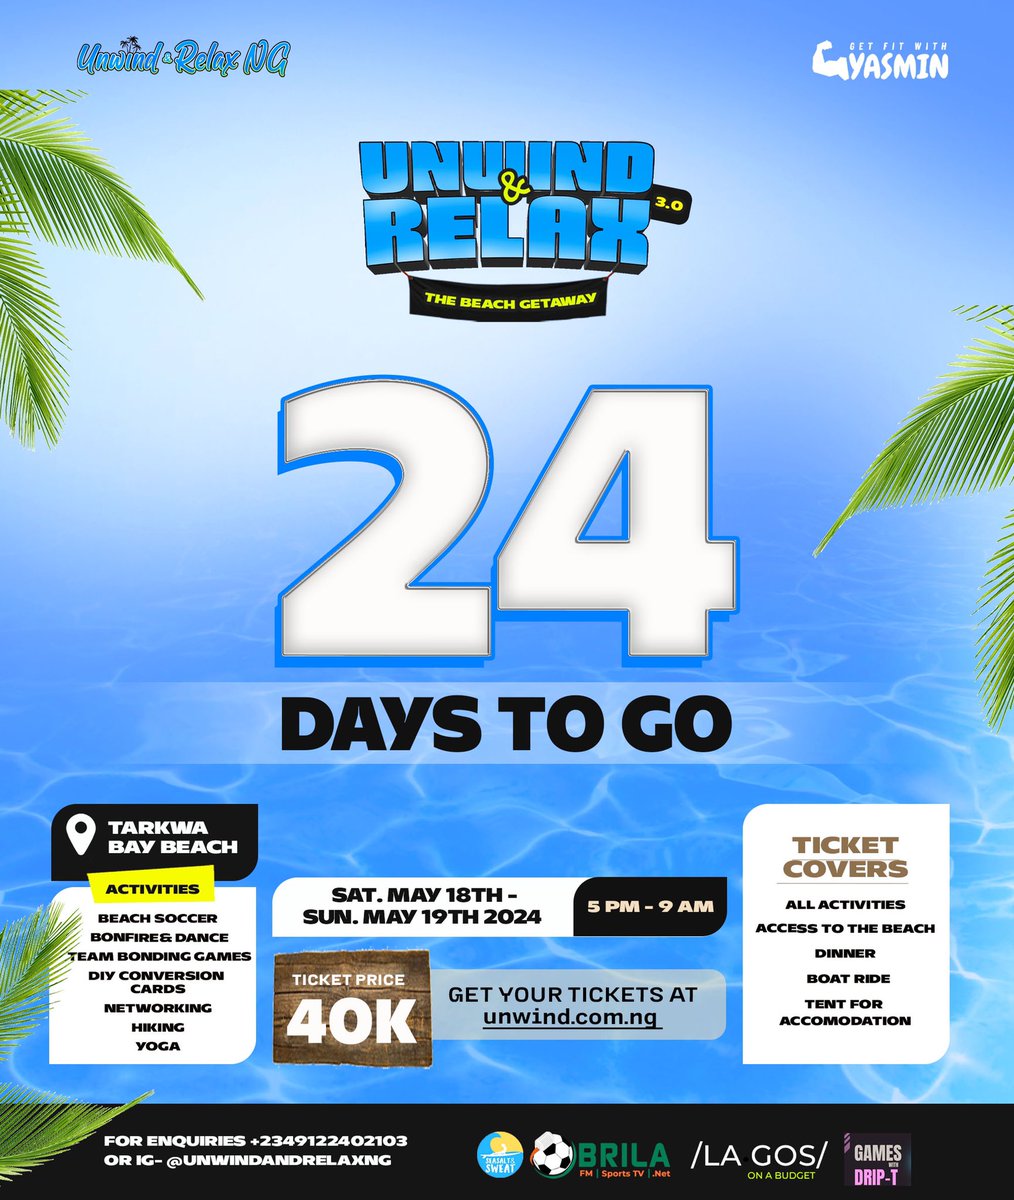 Join us on a 24-day journey of relaxation and rejuvenation! Your all-inclusive tickets guarantee an unforgettable experience filled with activities, delicious meals, seamless transportation, and tent camping. 

Get ready to unwind like never before!

#24days #unwind #relax